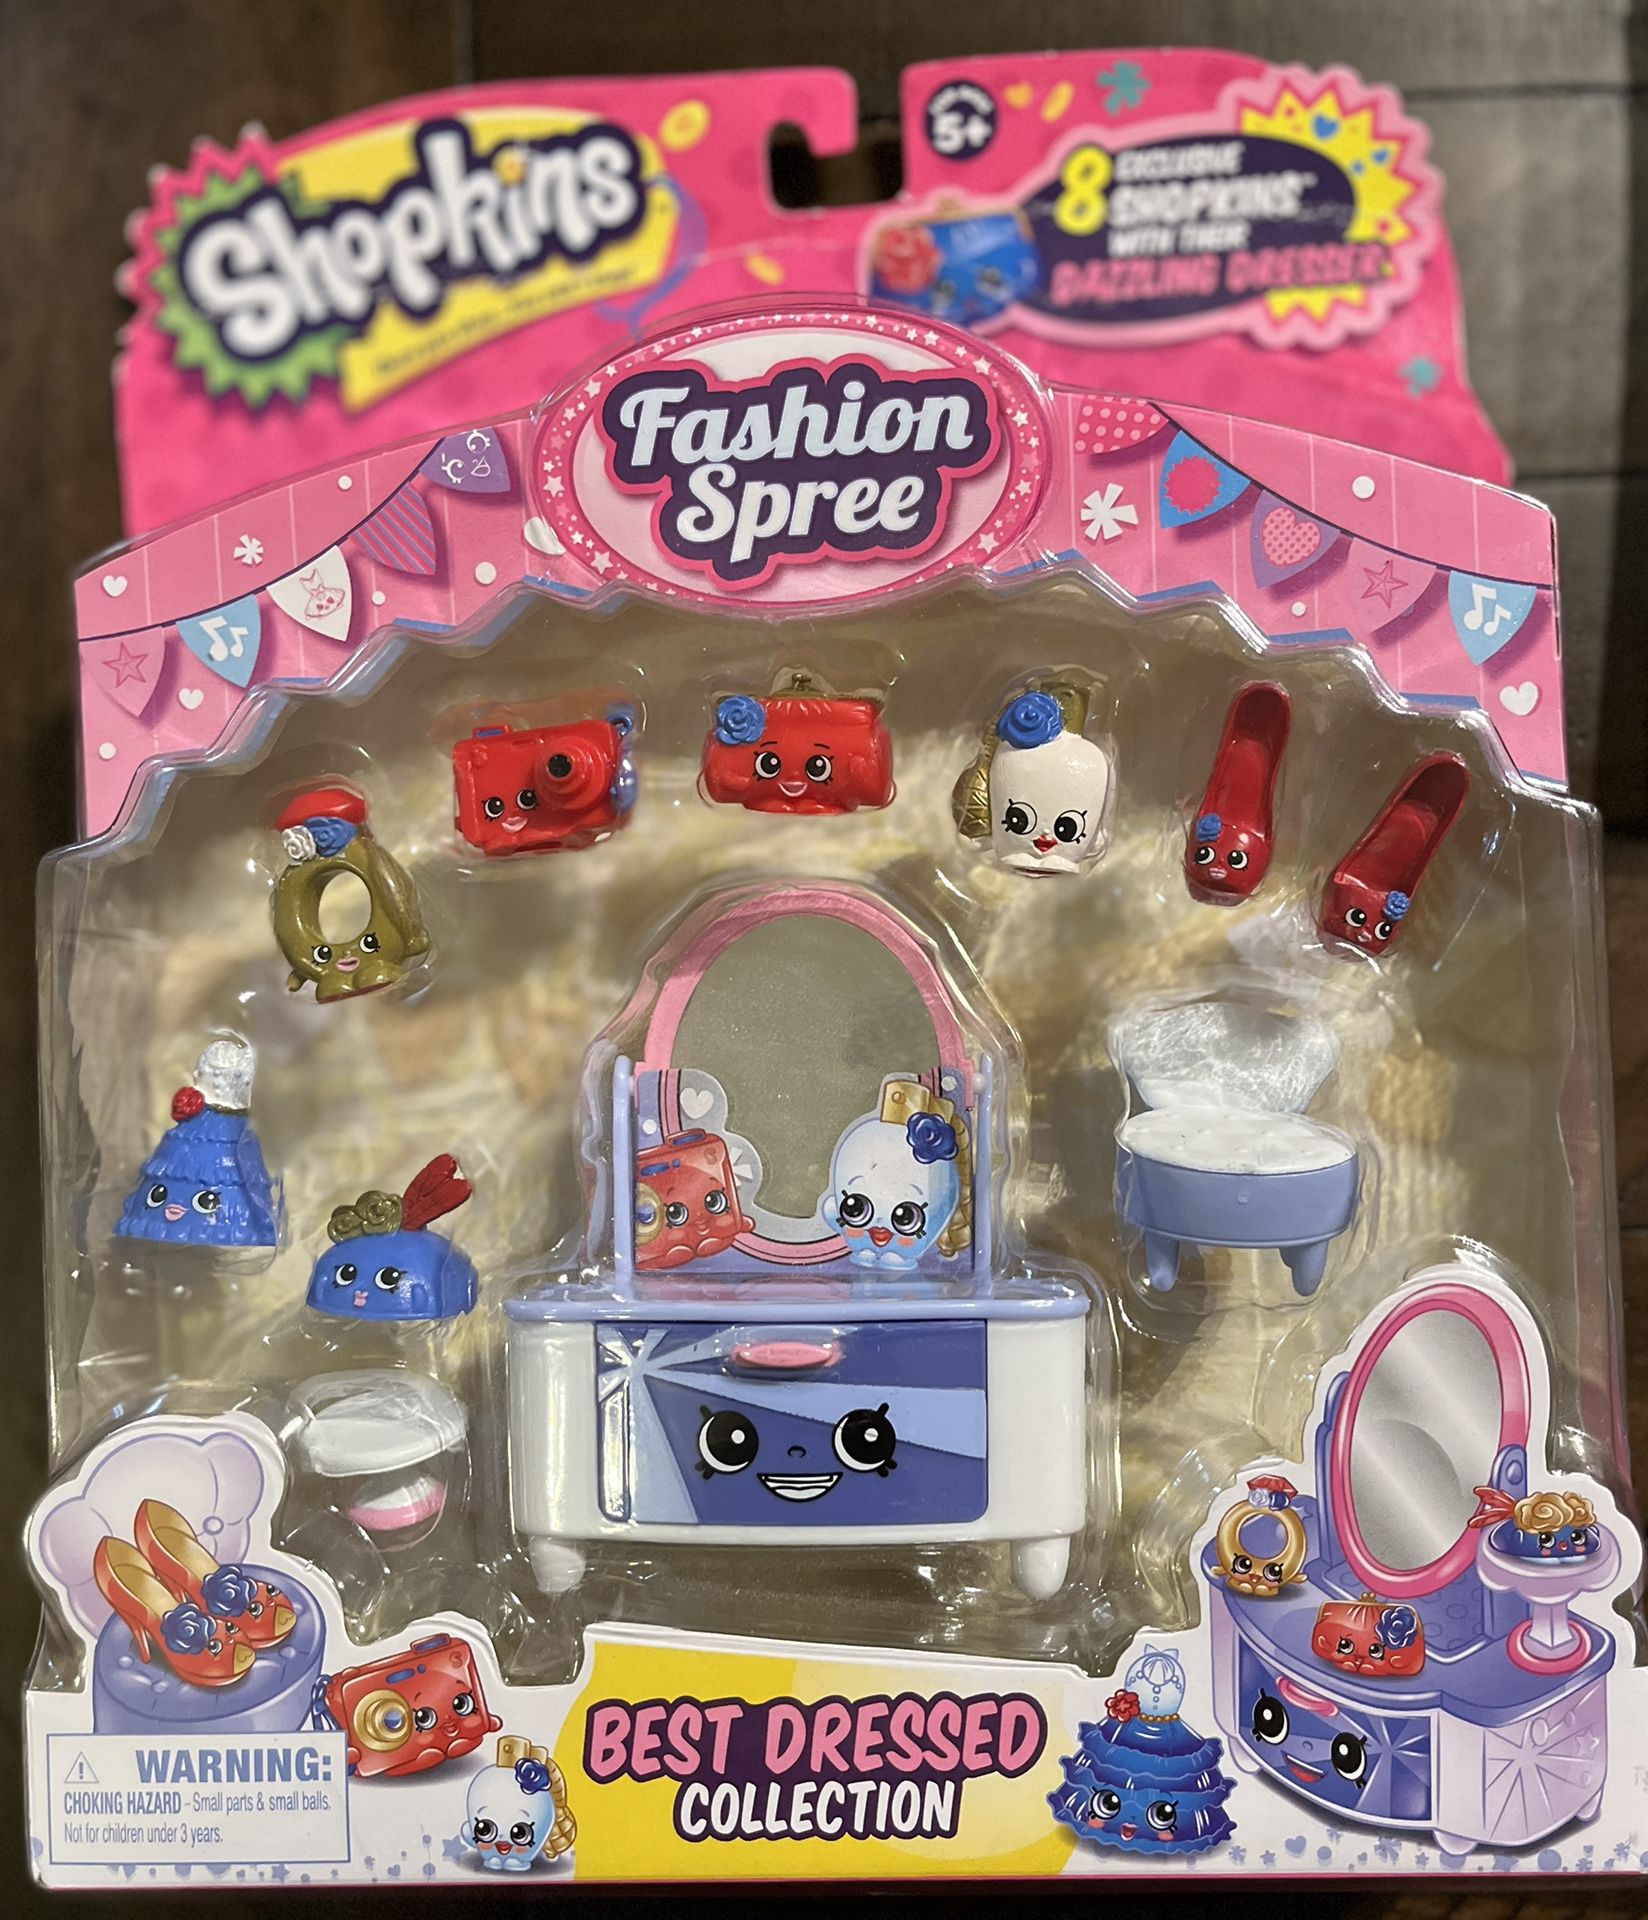 **New** Shopkins Fashion Spree Best Dressed Collection 